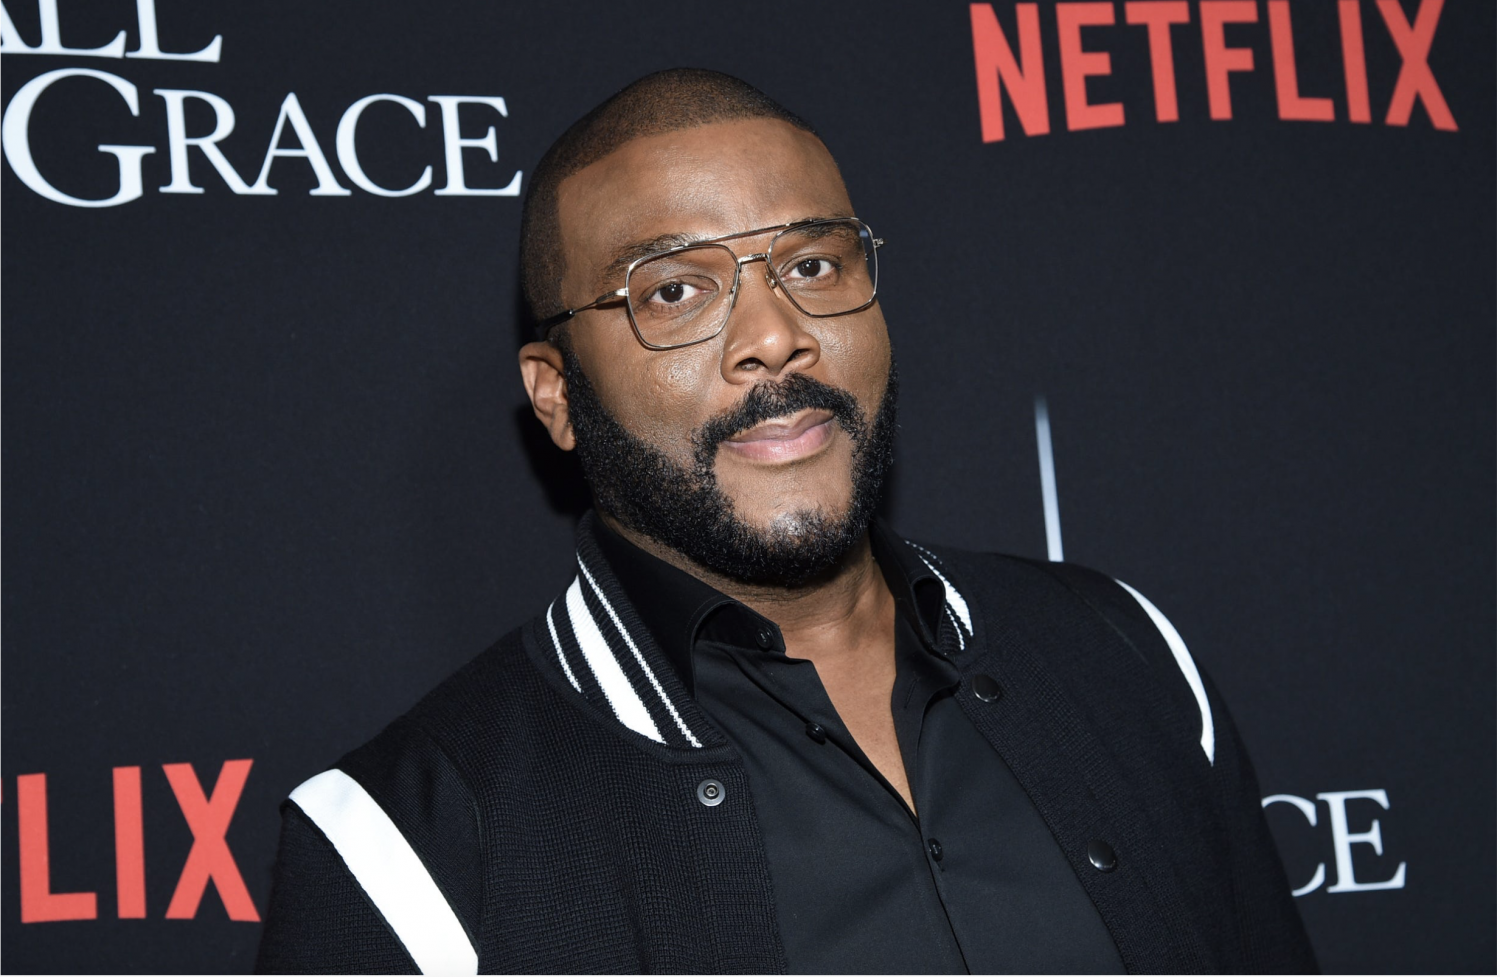 Tyler Perry reveals the personality trait that helped him build his massive media empire, and that he says all managers should look for when hiring new talent